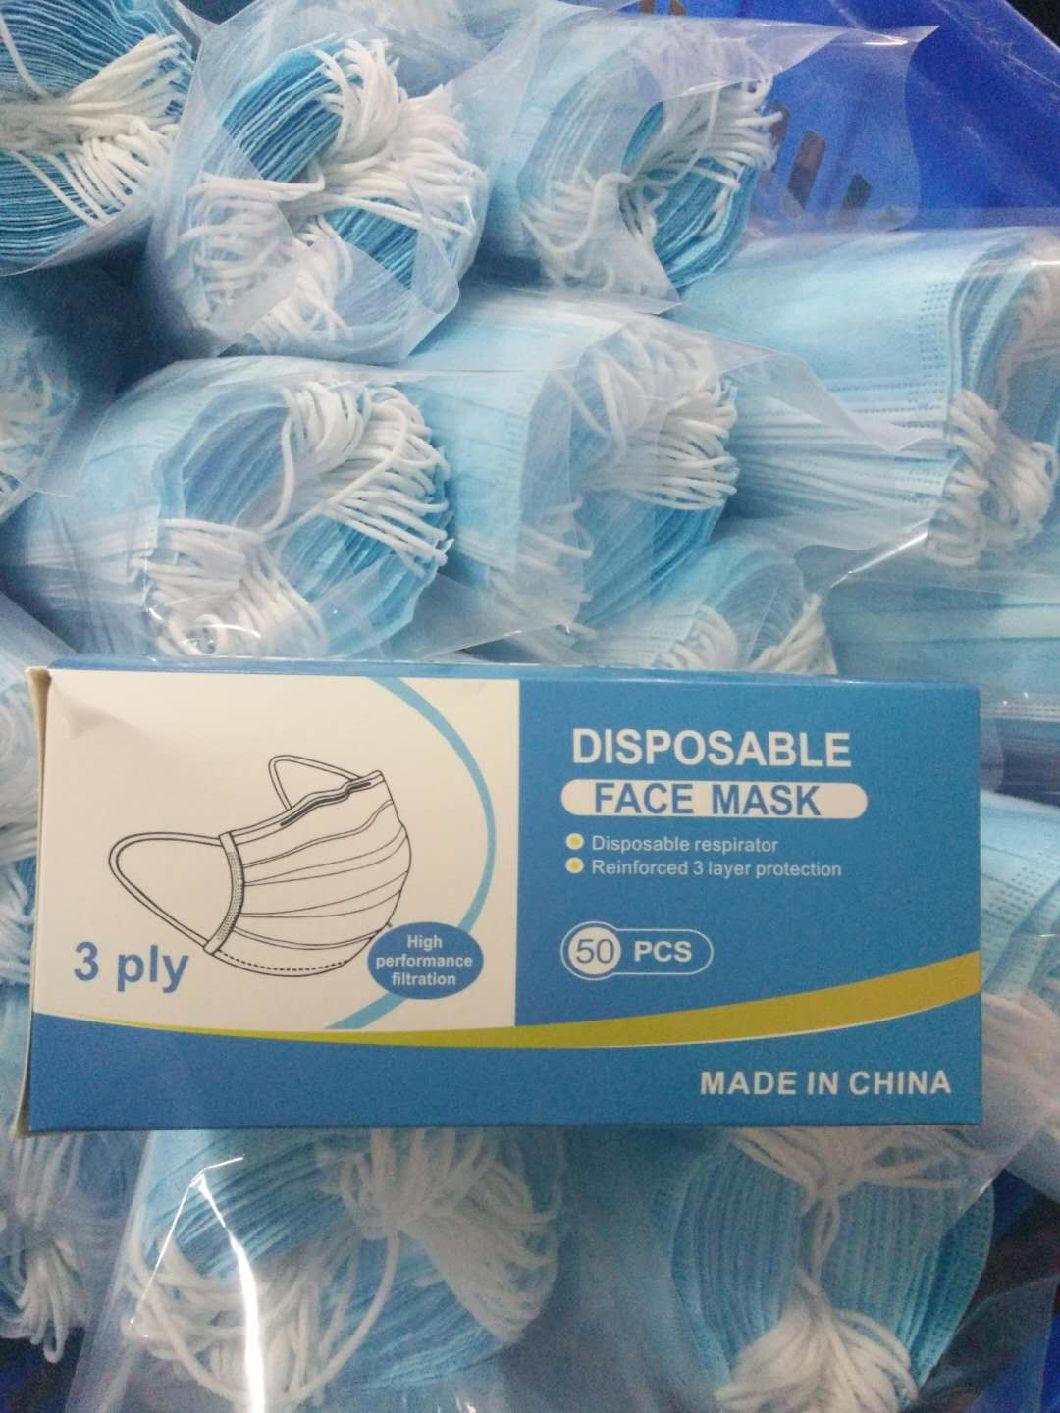 Protective Face Mask Disposable Nonwoven Mask Anti Virus Dust Earloop Disposable Masks 95% Filter 3ply Face Mask